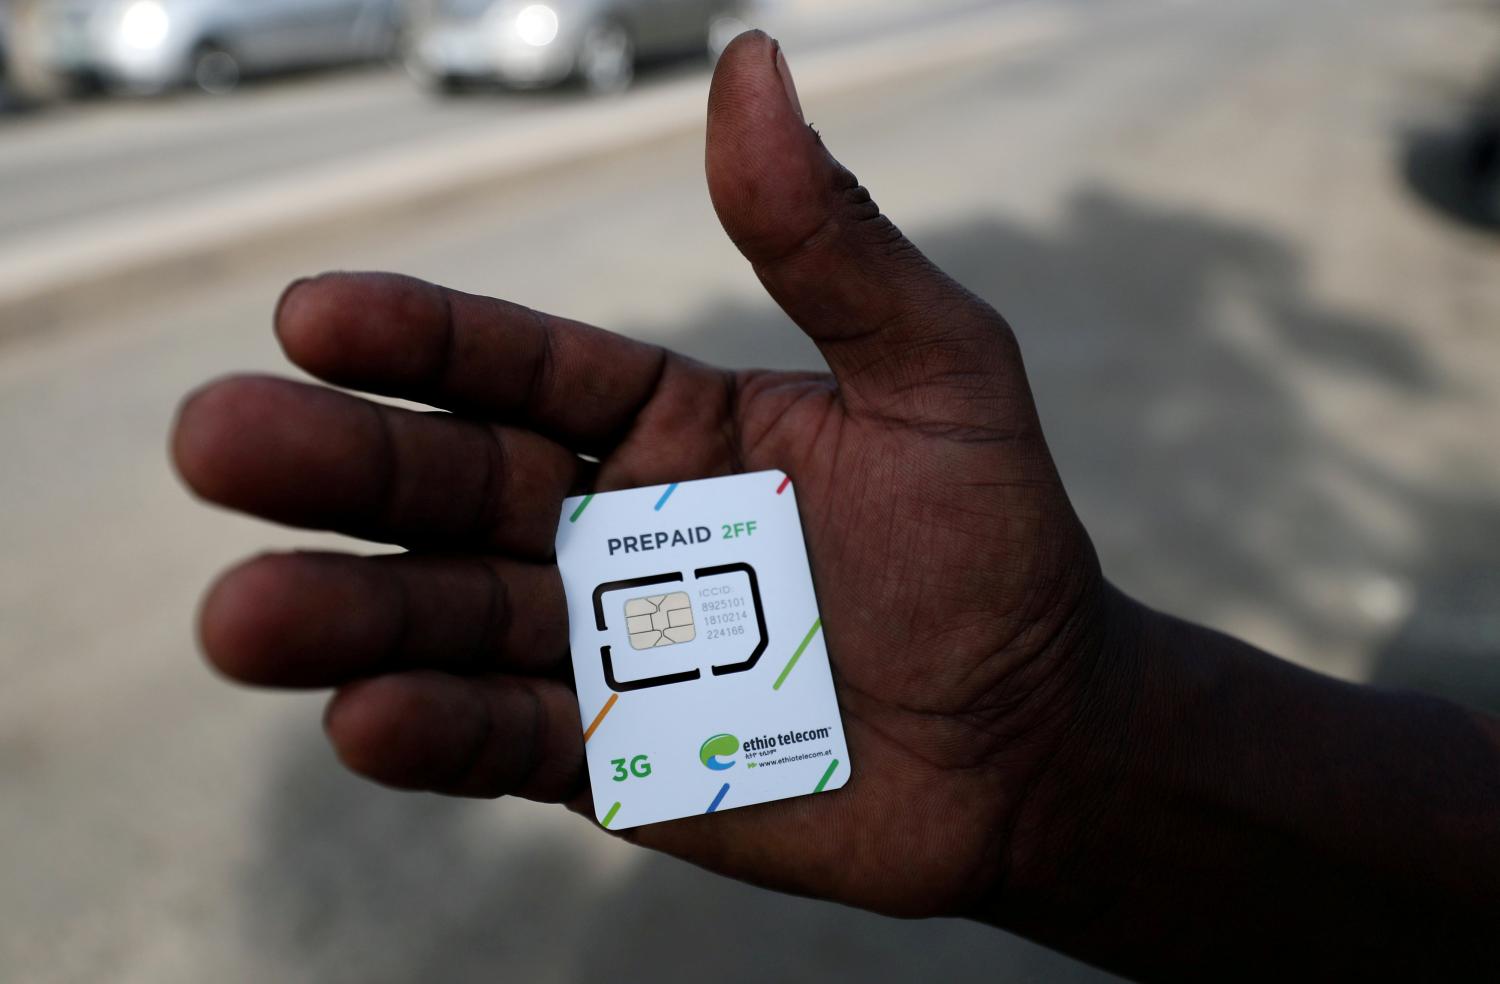 FILE PHOTO: A customer holds a 3G prepaid sim card after buying the service from an Ethio-Telecom shop in Addis Ababa, Ethiopia, November 12, 2019. REUTERS/Tiksa Negeri/File Photo